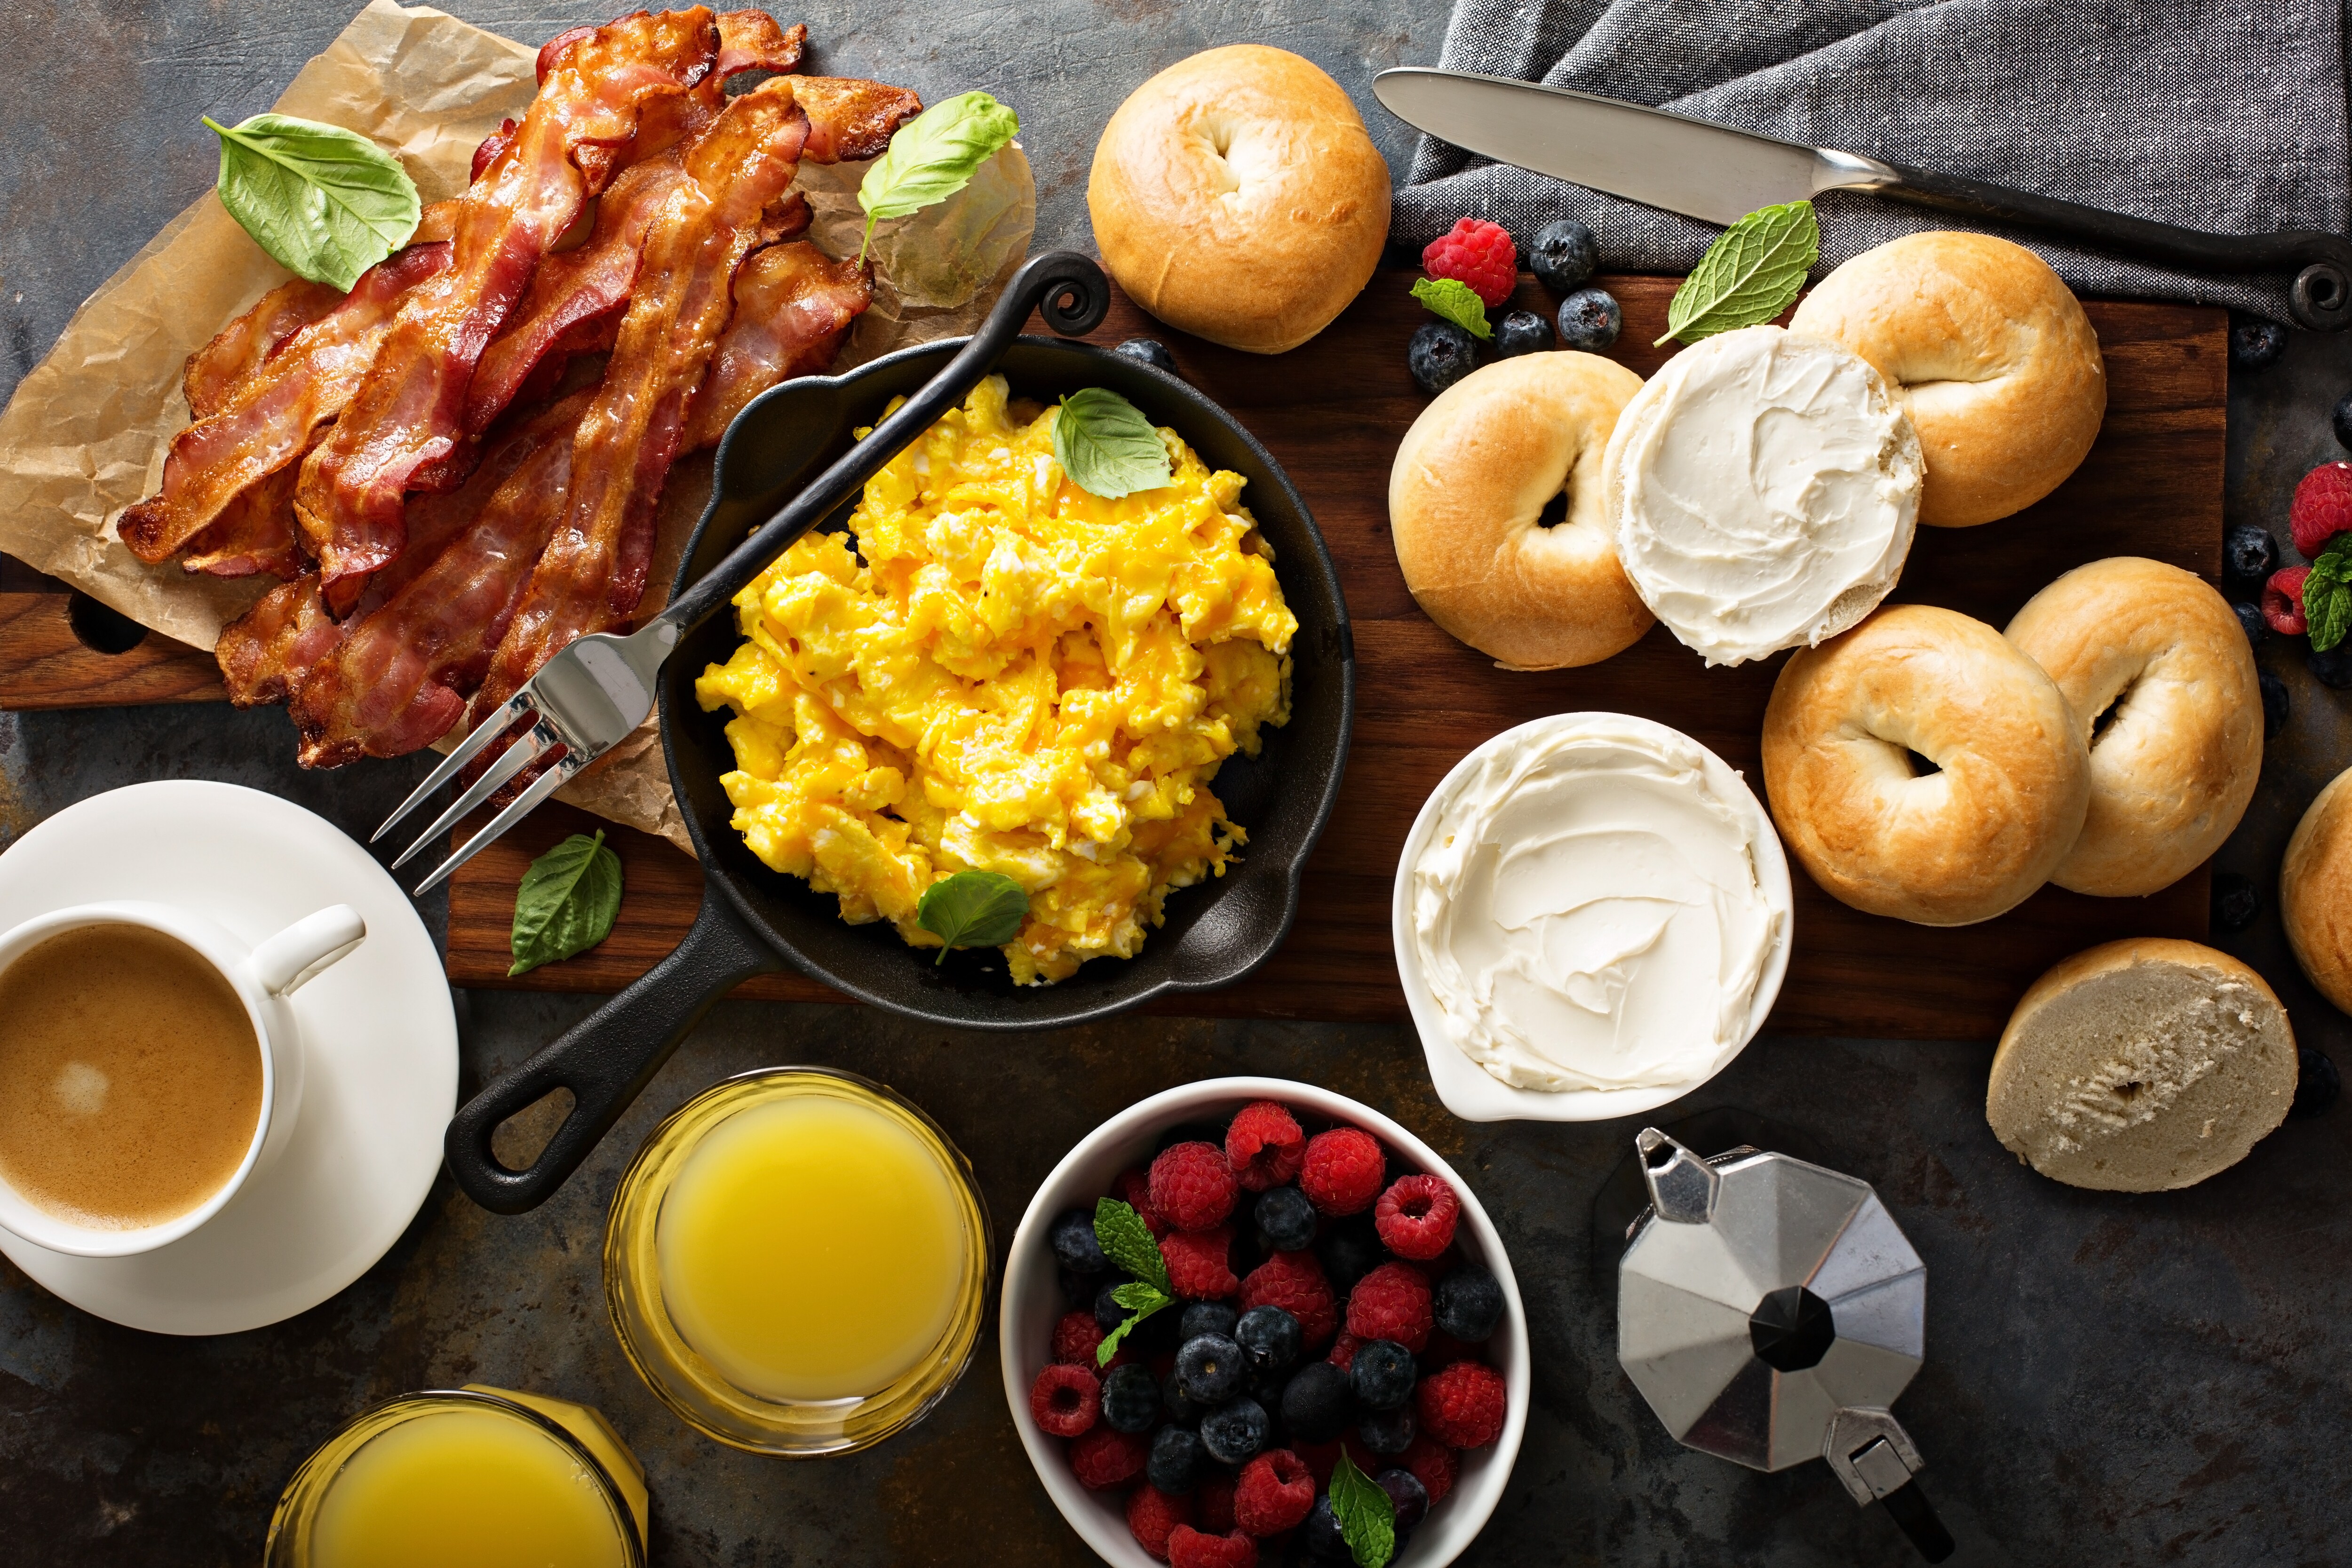 Breakfast spread with bagels, bacon, fresh berries and juice